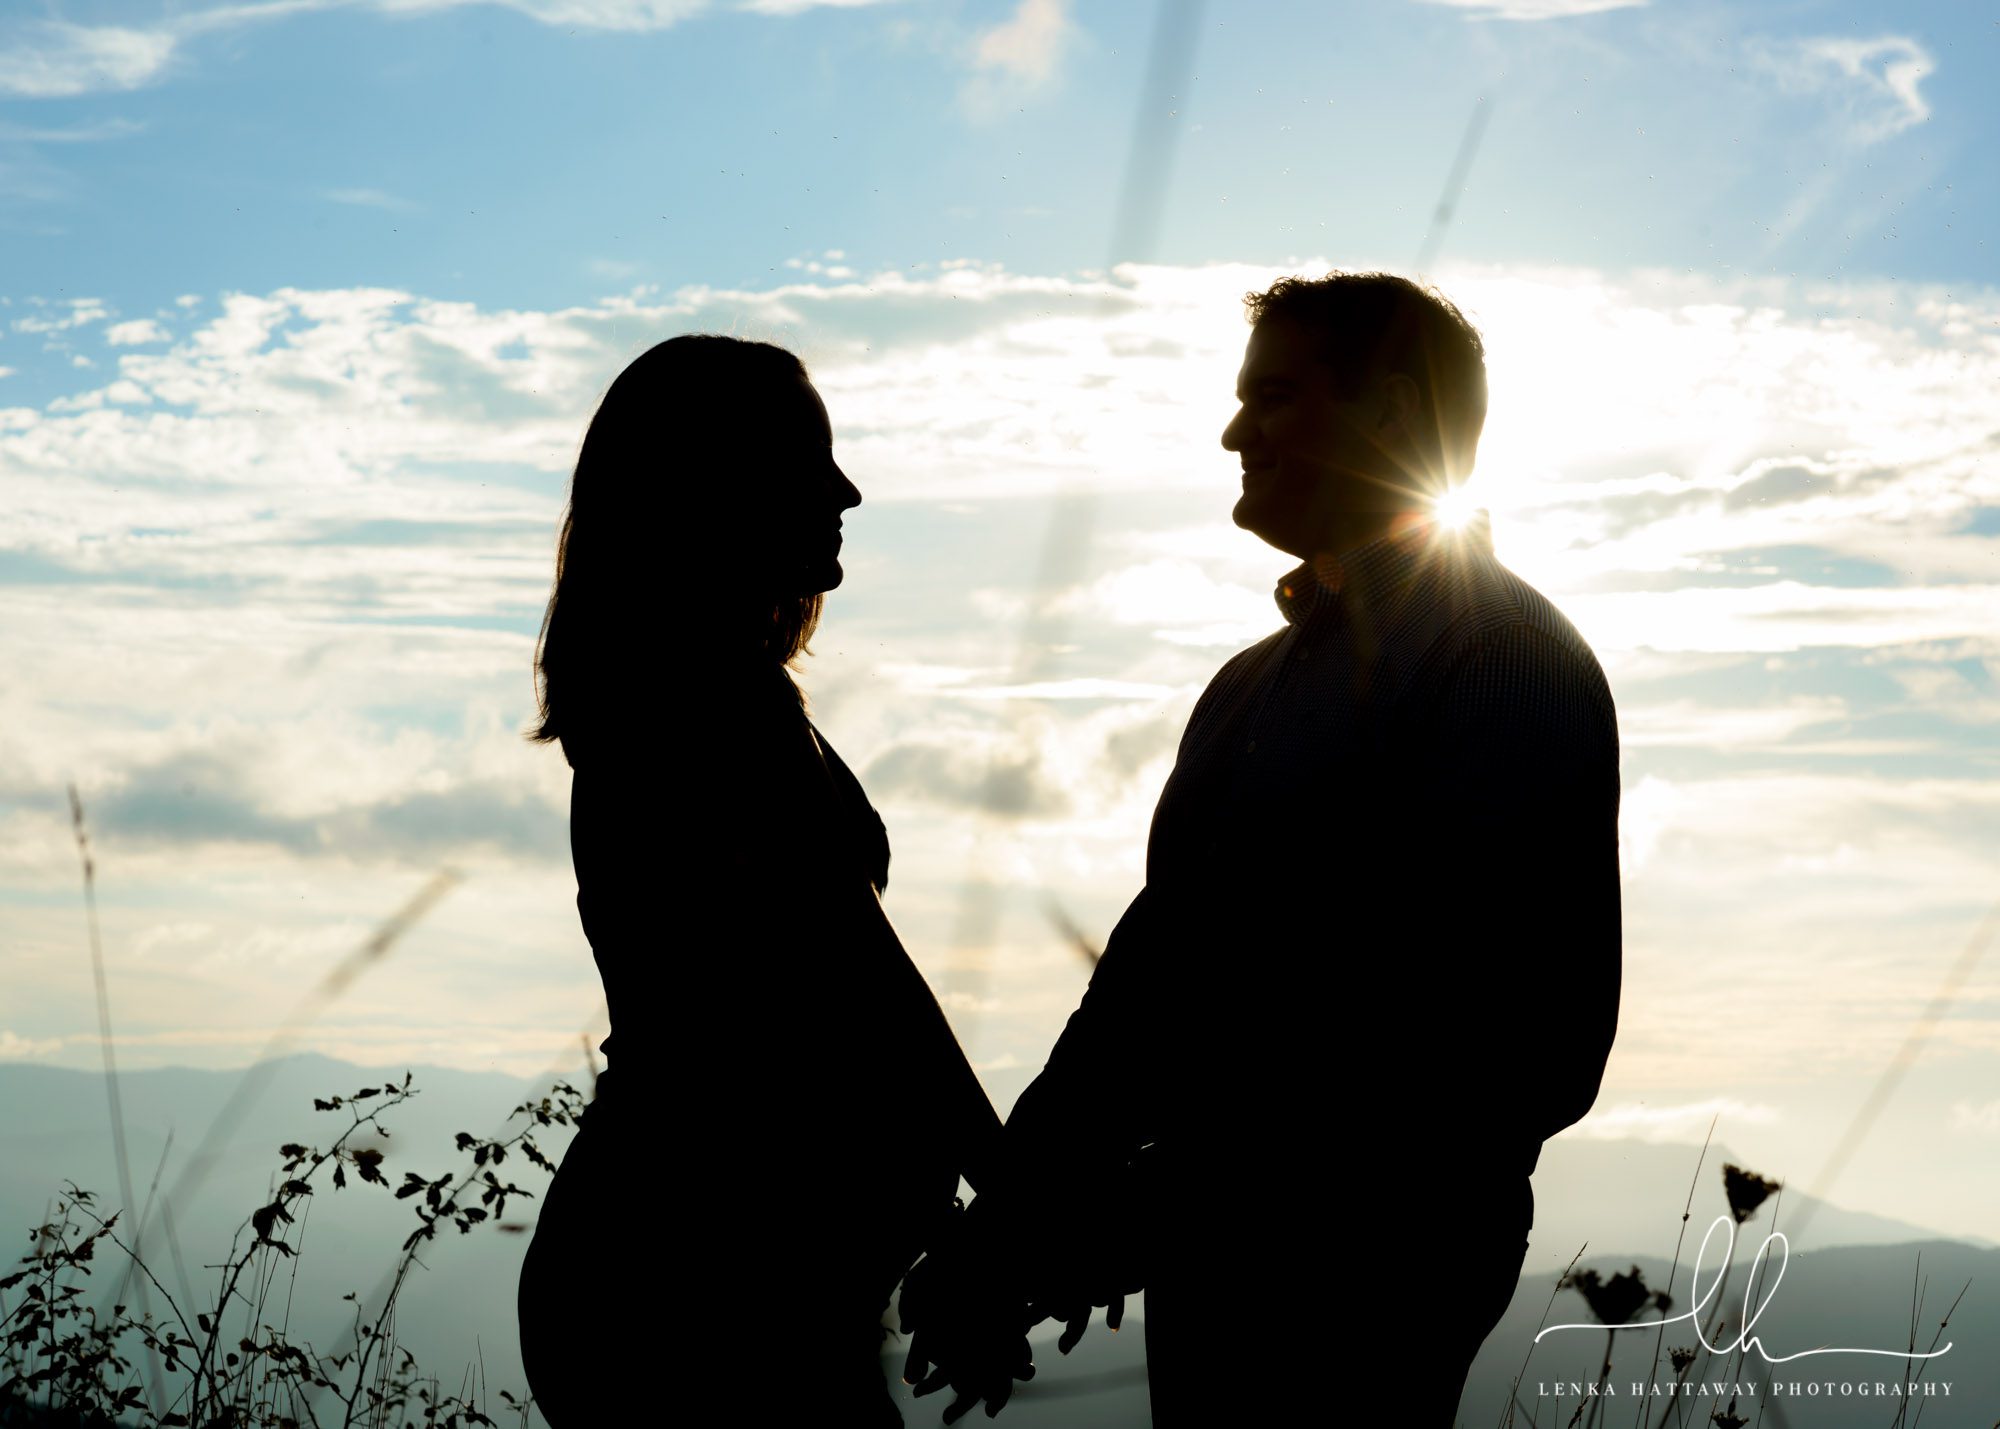 A silhouette of an expecting couple taken in the mountains.